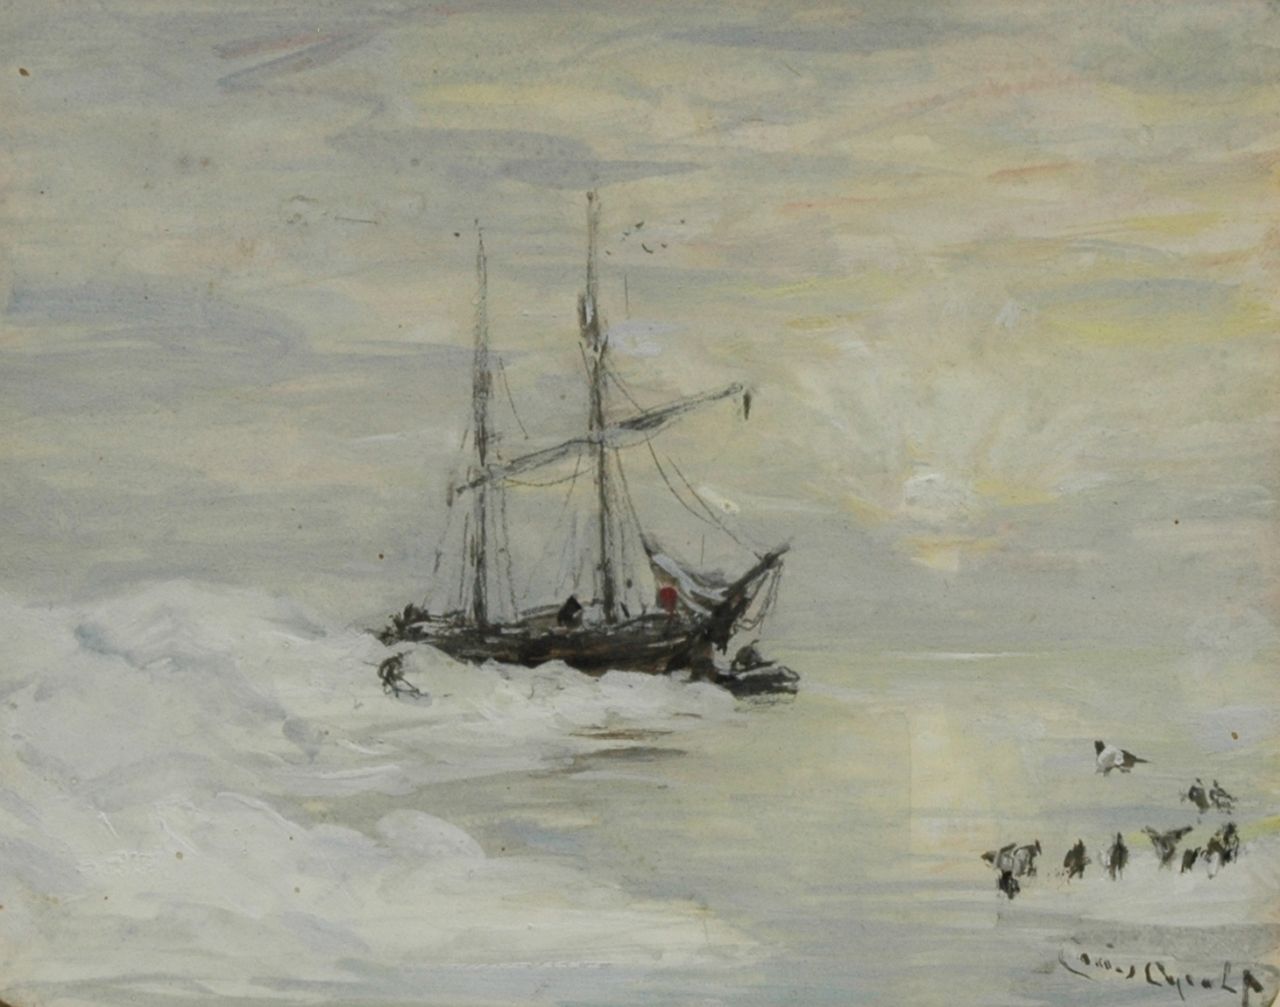 Apol L.F.H.  | Lodewijk Franciscus Hendrik 'Louis' Apol, The Willem Barents near Spitsbergen, at sunset, pencil and gouache on paper 10.3 x 12.8 cm, signed l.r.